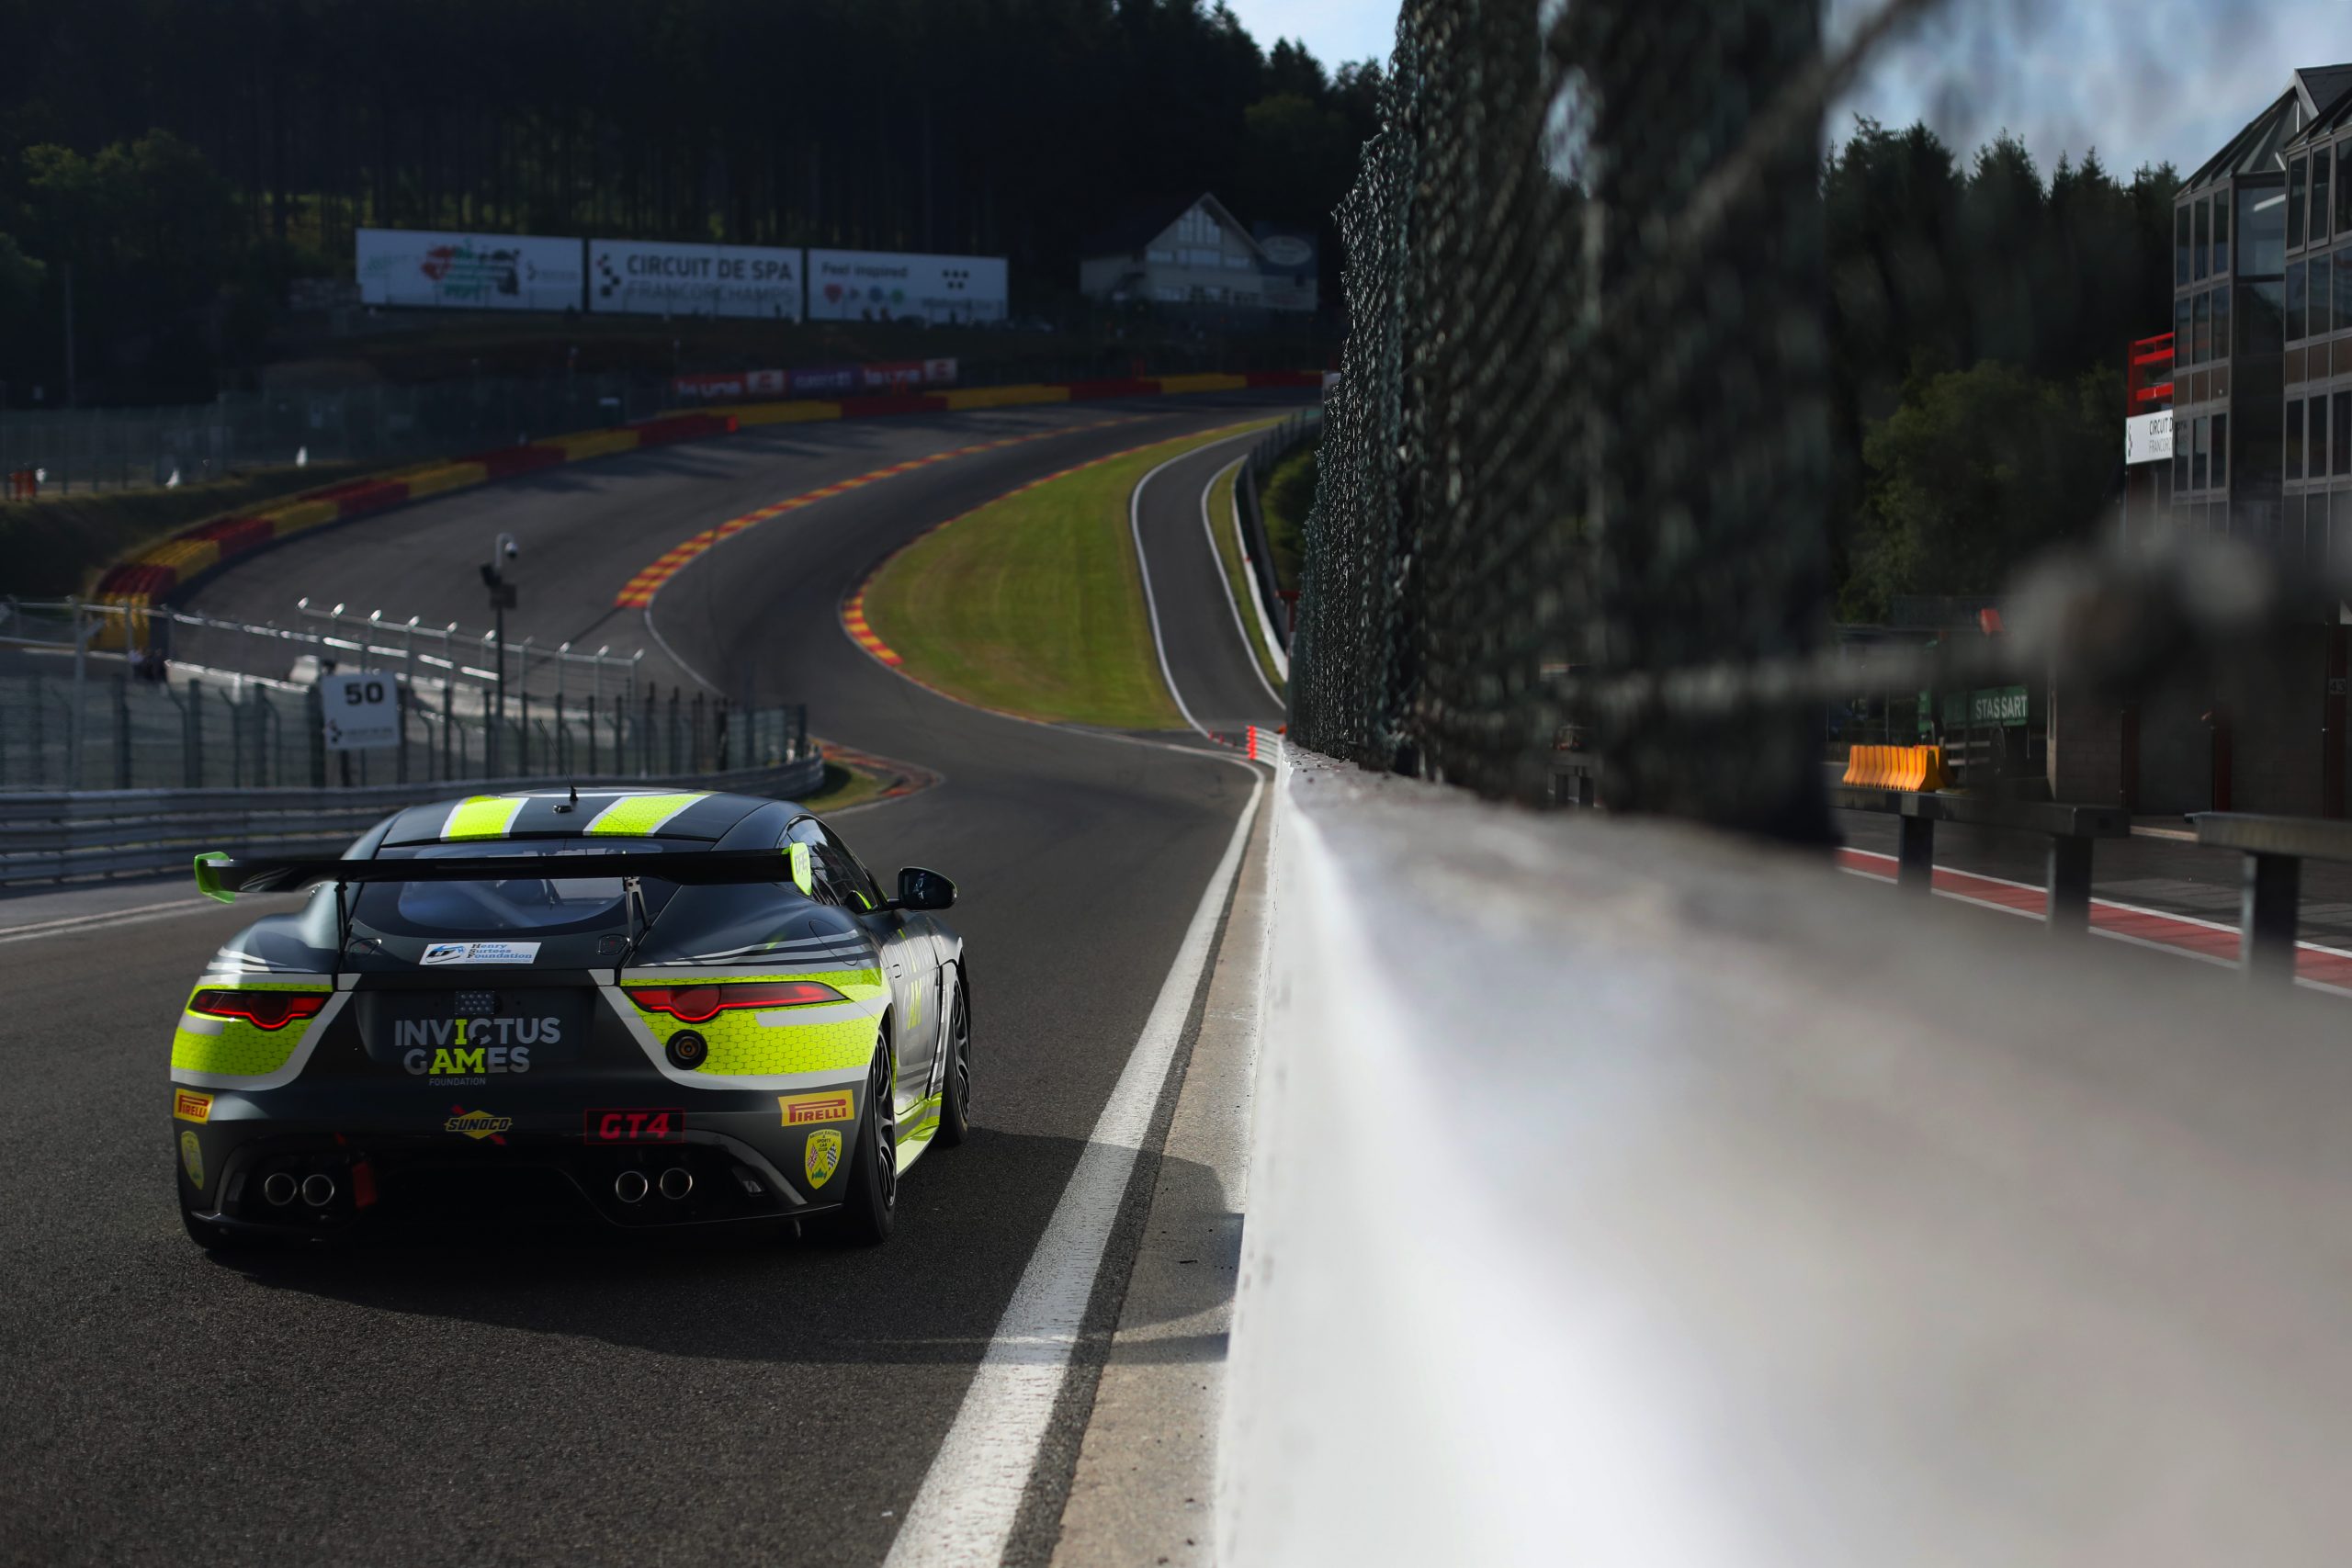 FEATURE: Spa 2019 Revisited